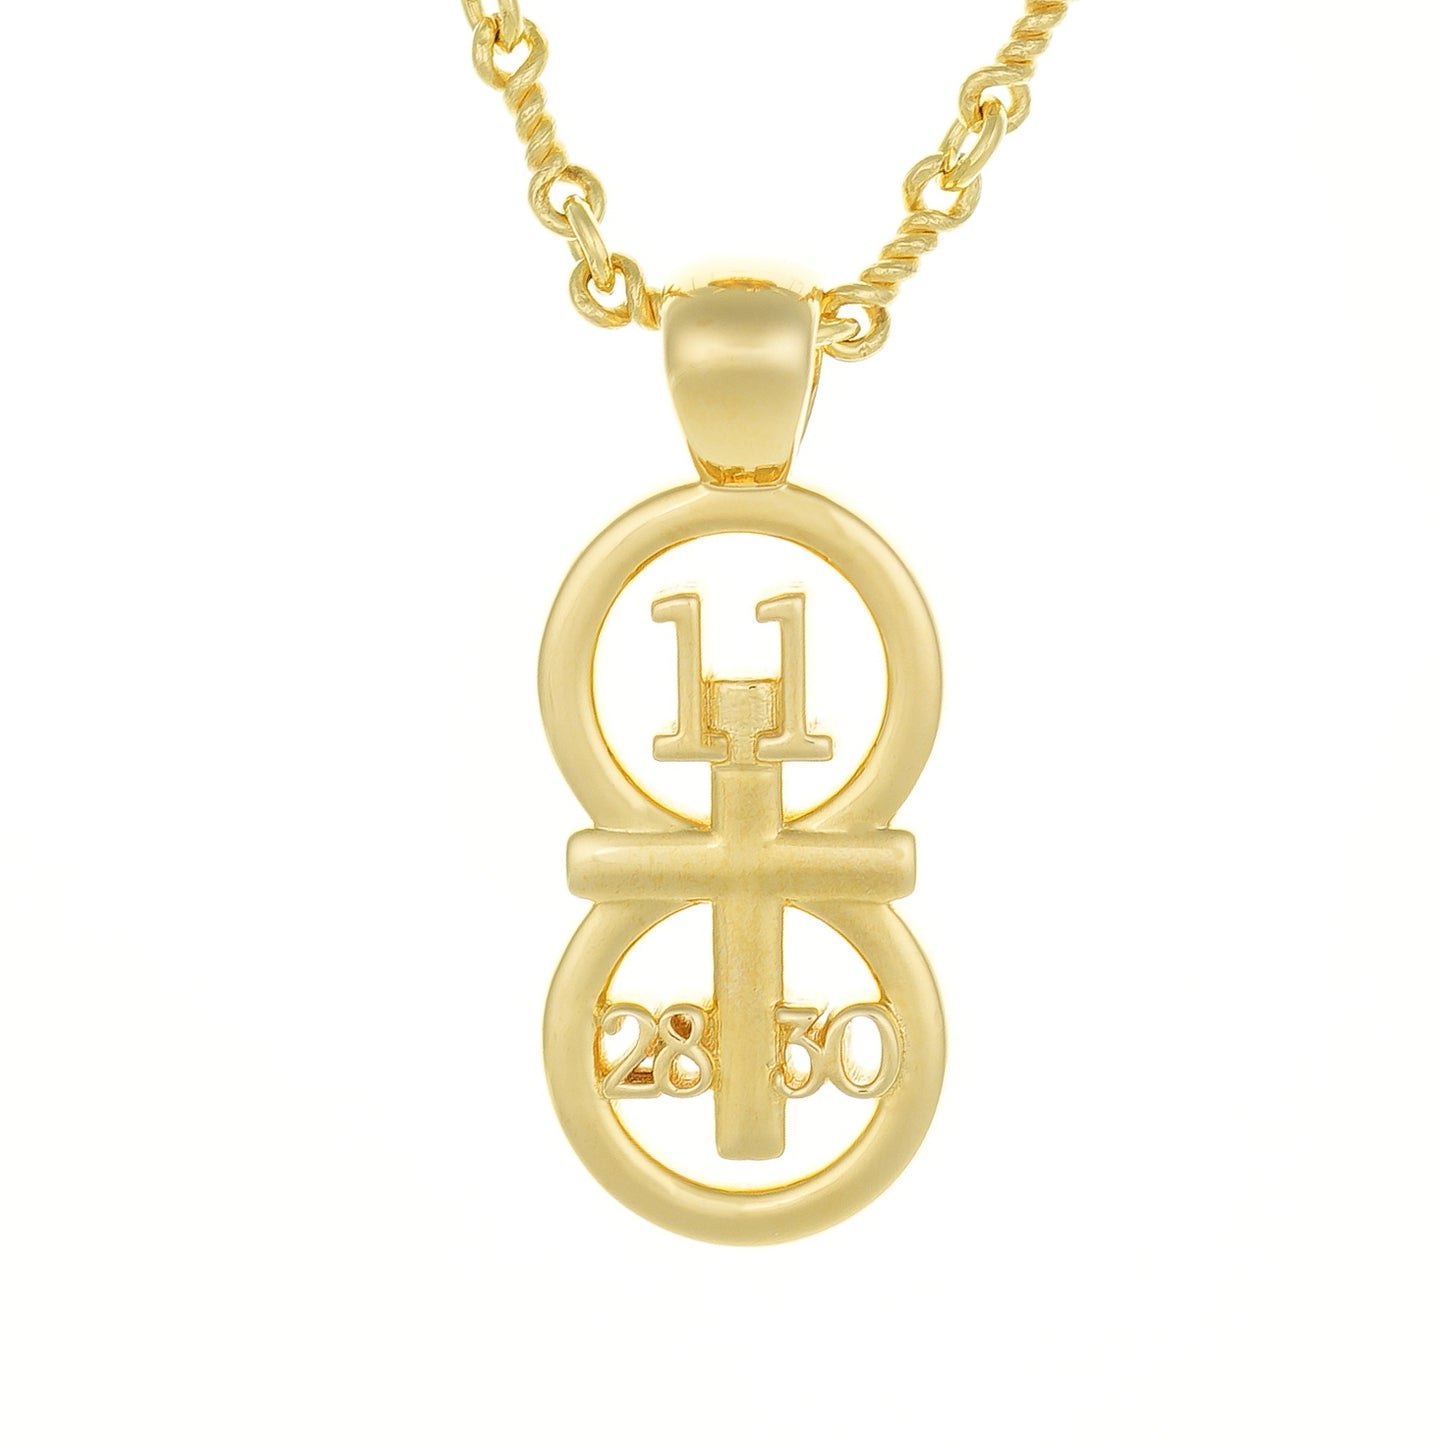 Our gold large pendant displayed on a white background with our 14k gold filled Rolo chain.  The RIYAN 29 and 11® pendant has the numbers 11, 28, and 30 intertwined with the cross to represent Matthew 11:28-30 with the chapter word "Matthew" inscribed on the back.